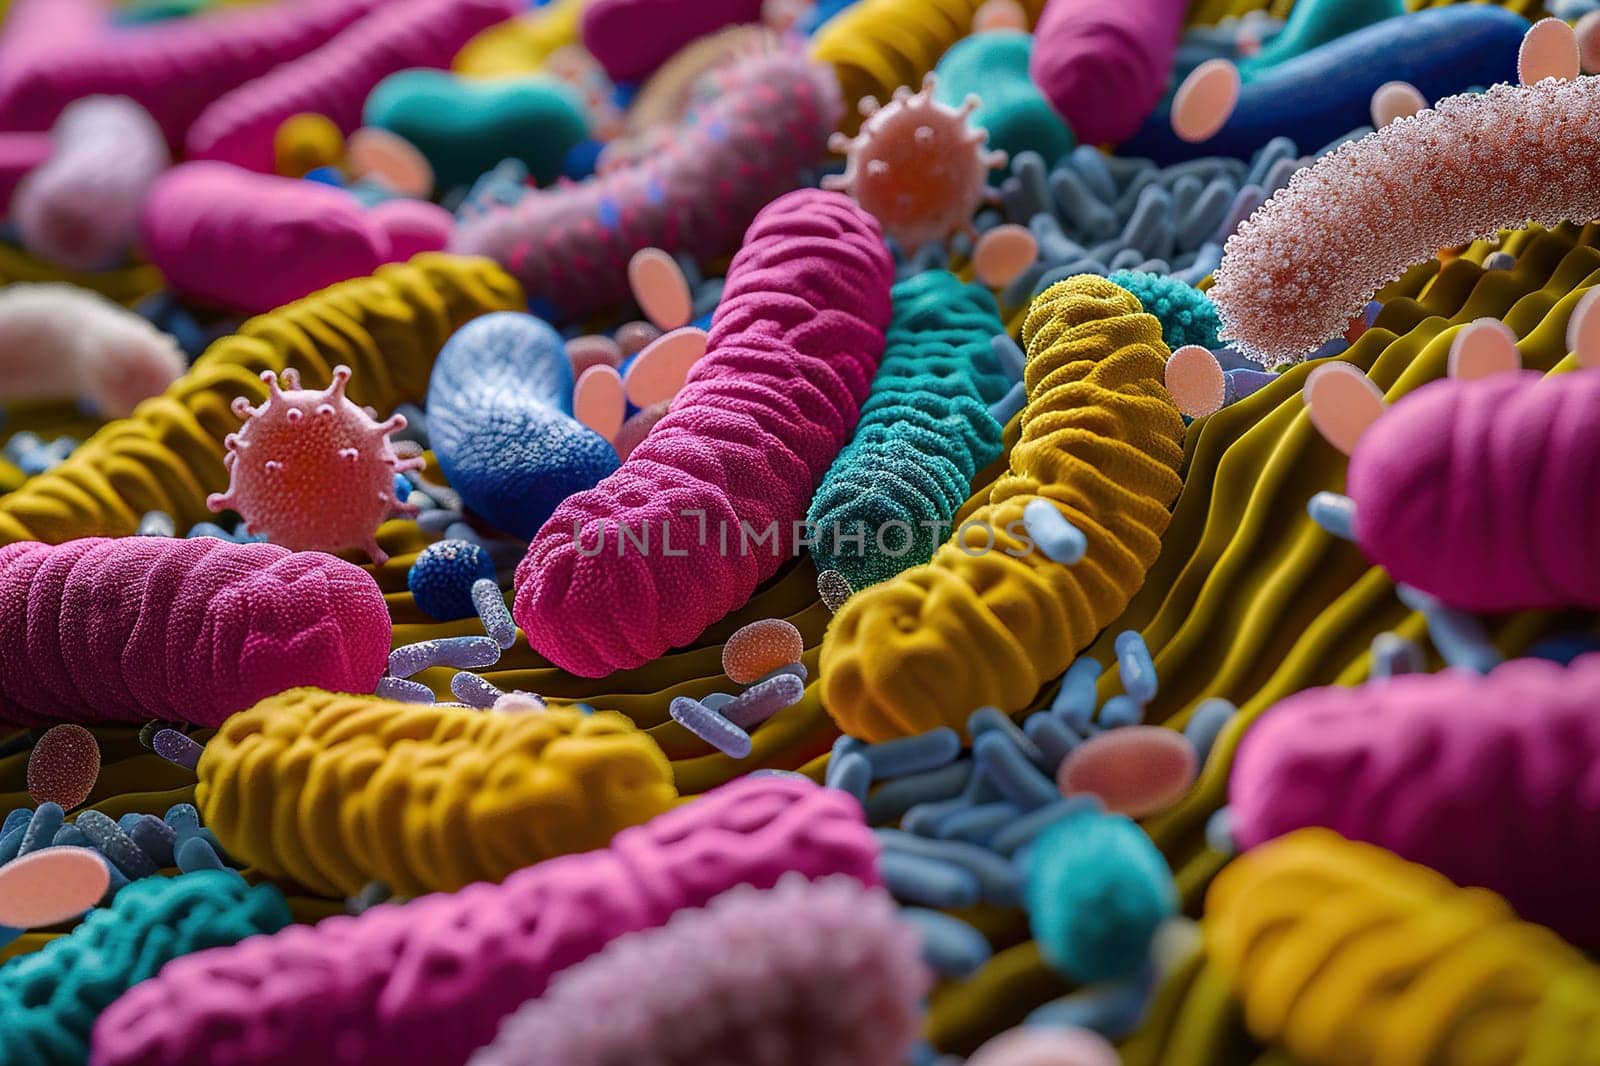 Many germs and bacteria of different shapes and colors. Microbiology. Pathogenic microbes.